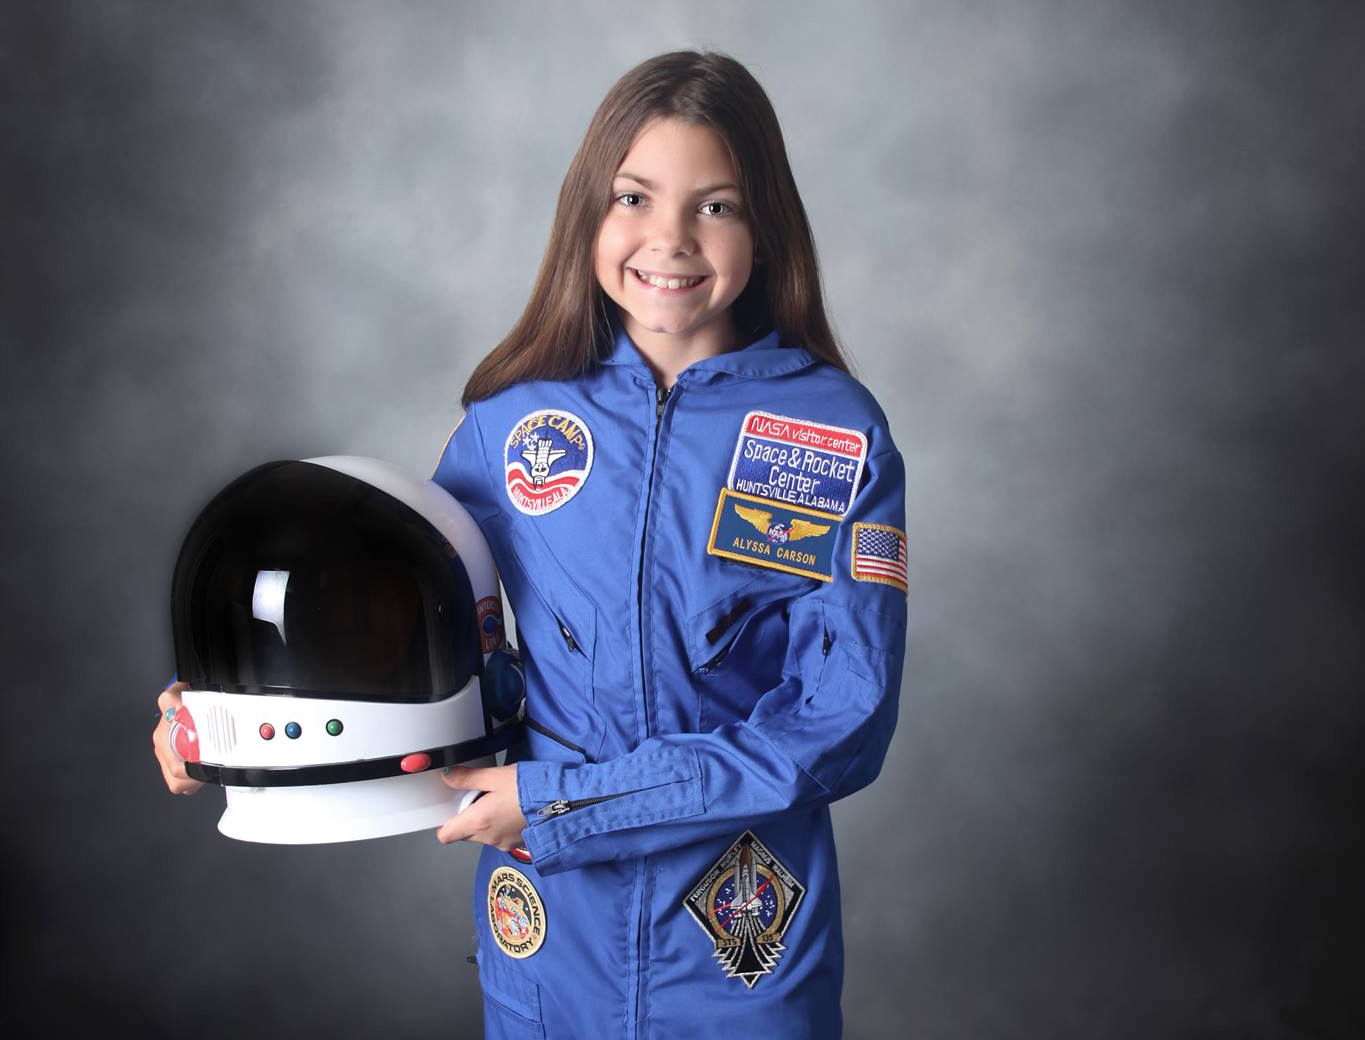 17 Years Old Alyssa Carson Would be “First human” on Mars | Blogging Heros